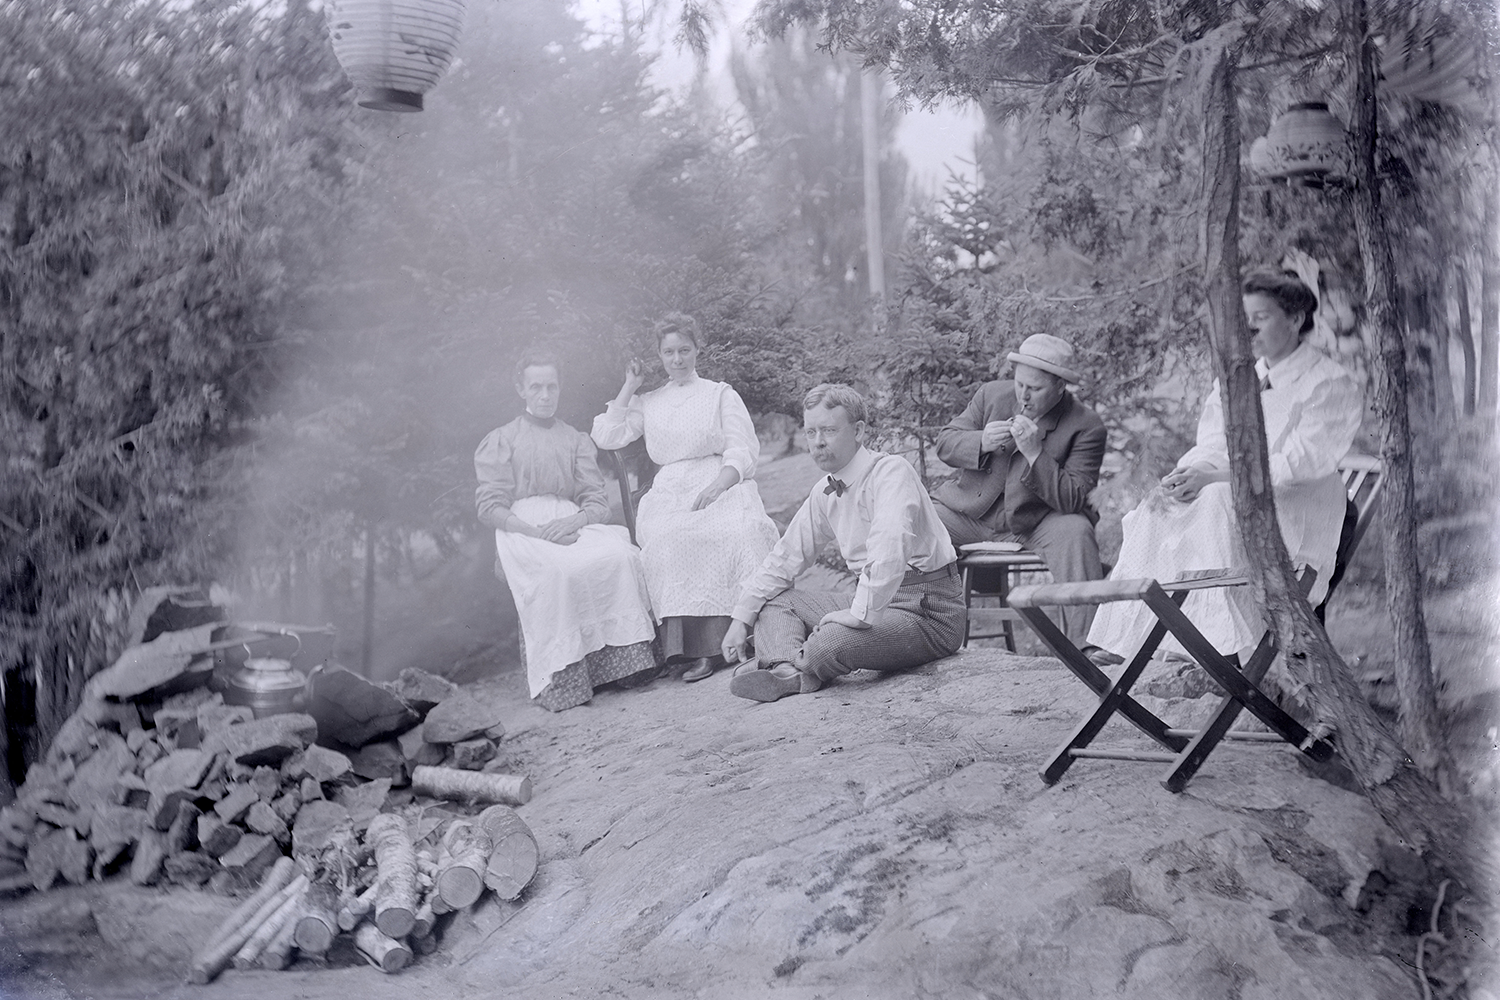 historic photo of people camping